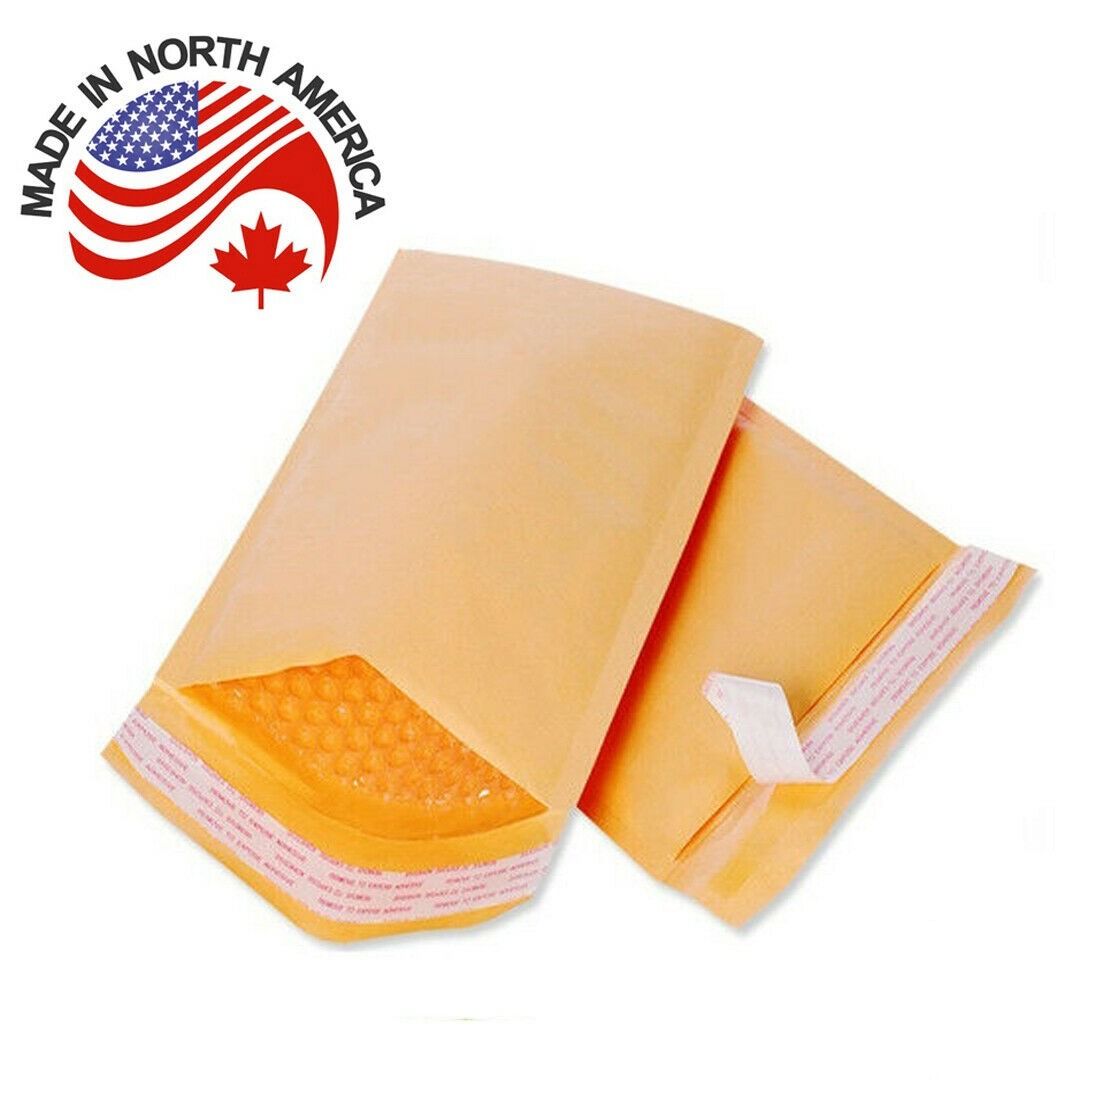 Padded Shipping Envelope Mailers Self Seal and Peal Strip 12.5x19 Inch MMBM Poly Bubble Mailer 100 Pack